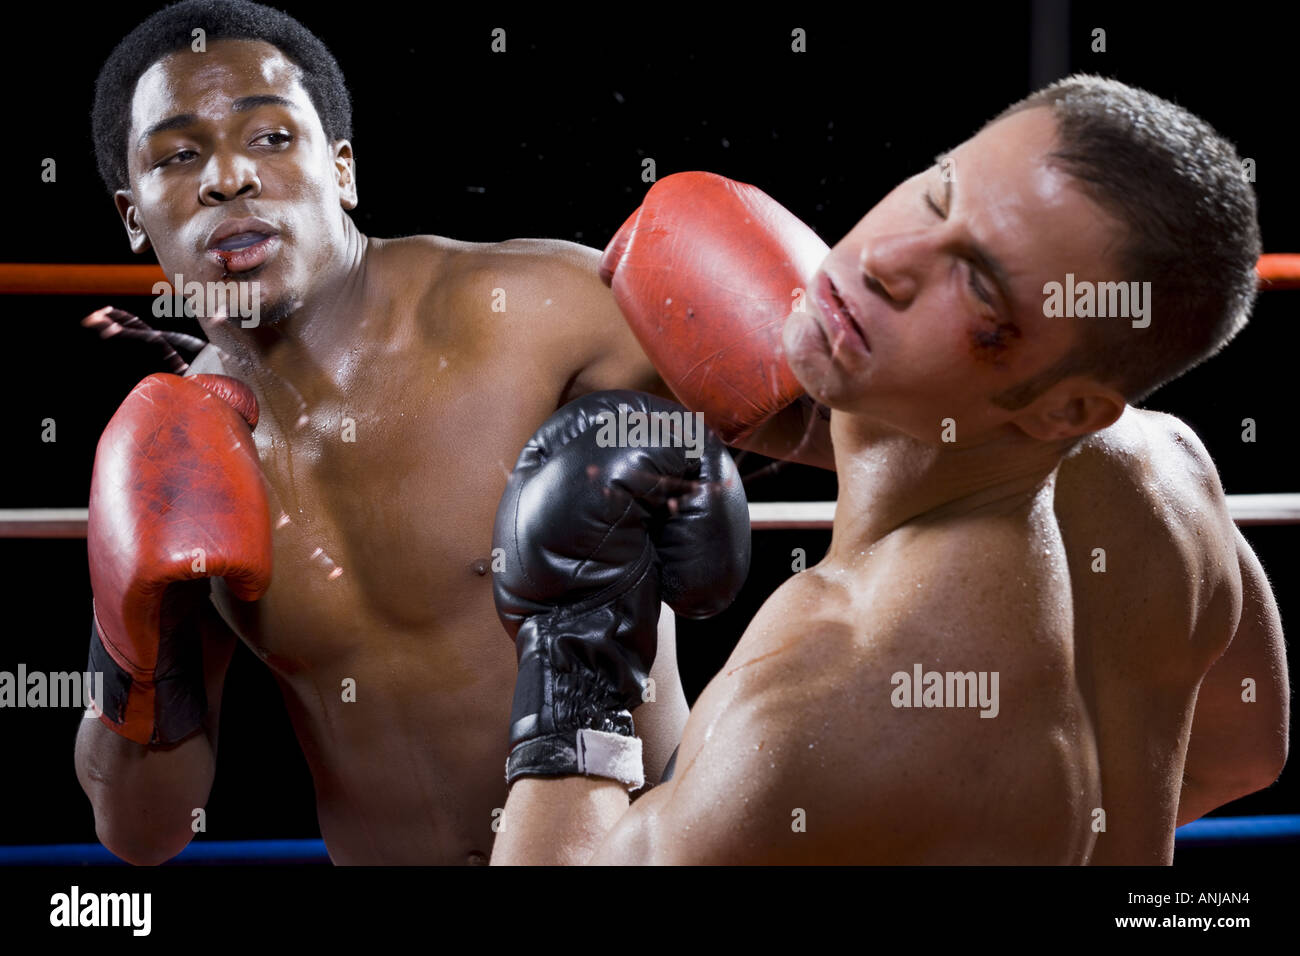 Close up of boxers fighting in a boxing ring Stock Photo